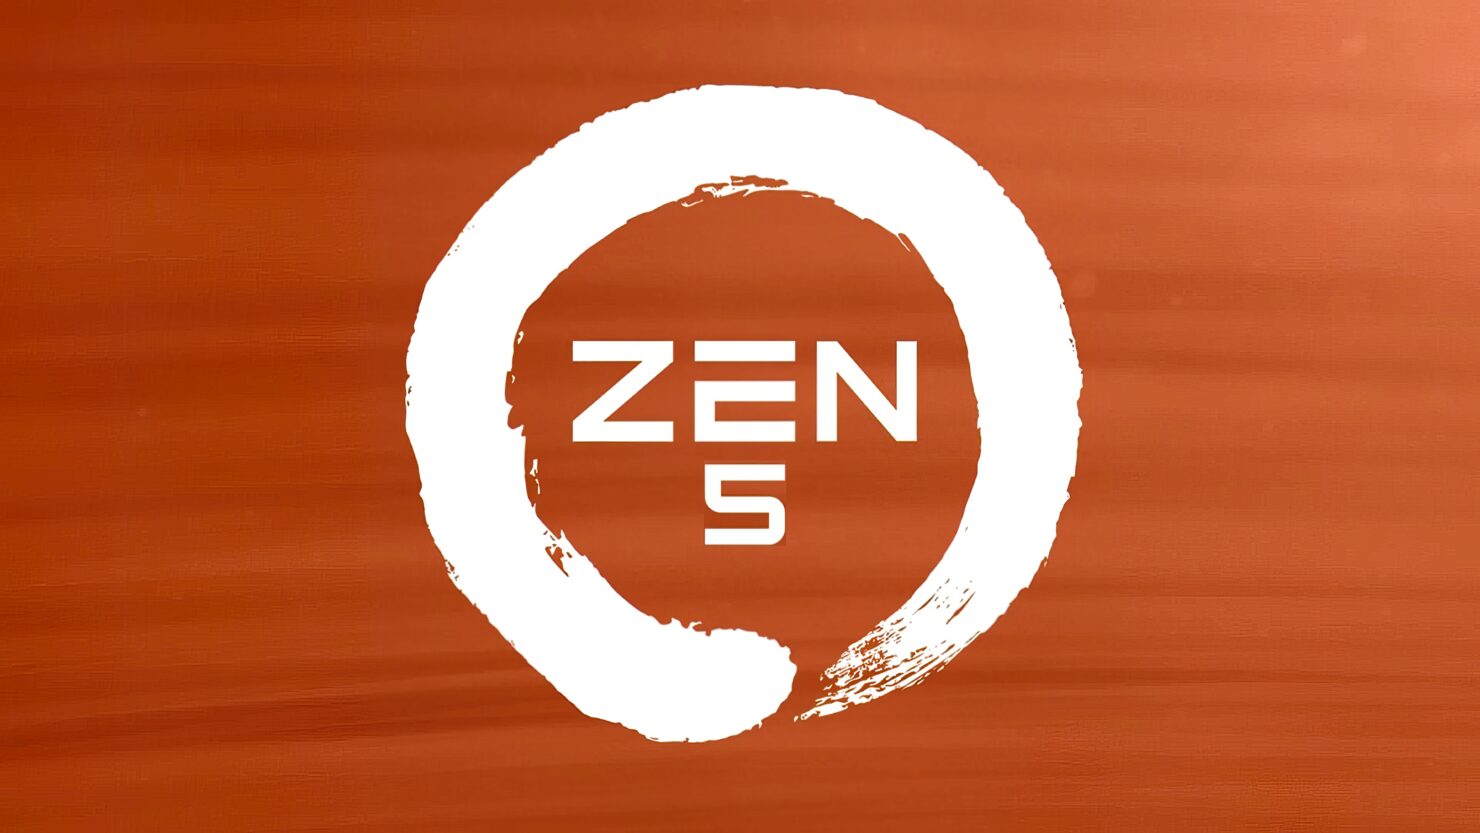 AMD Zen 5 CPUs could be delayed to 2024-2025 due to TSMC's priority allocation of 3nm node to Intel and Apple